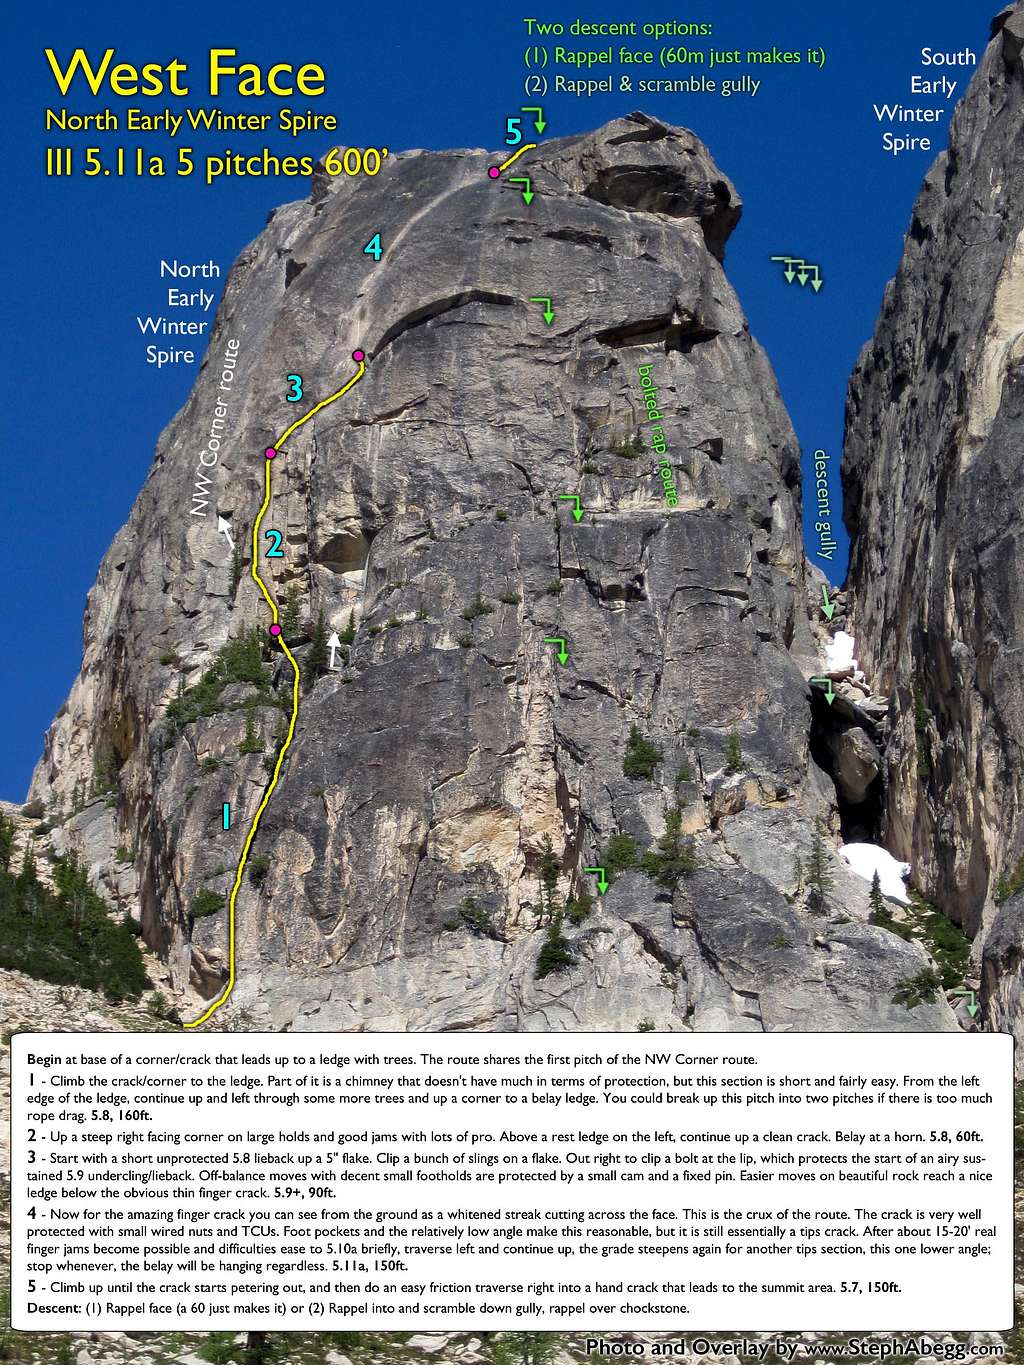 West Face of North Early Winter Spire Route Overlay